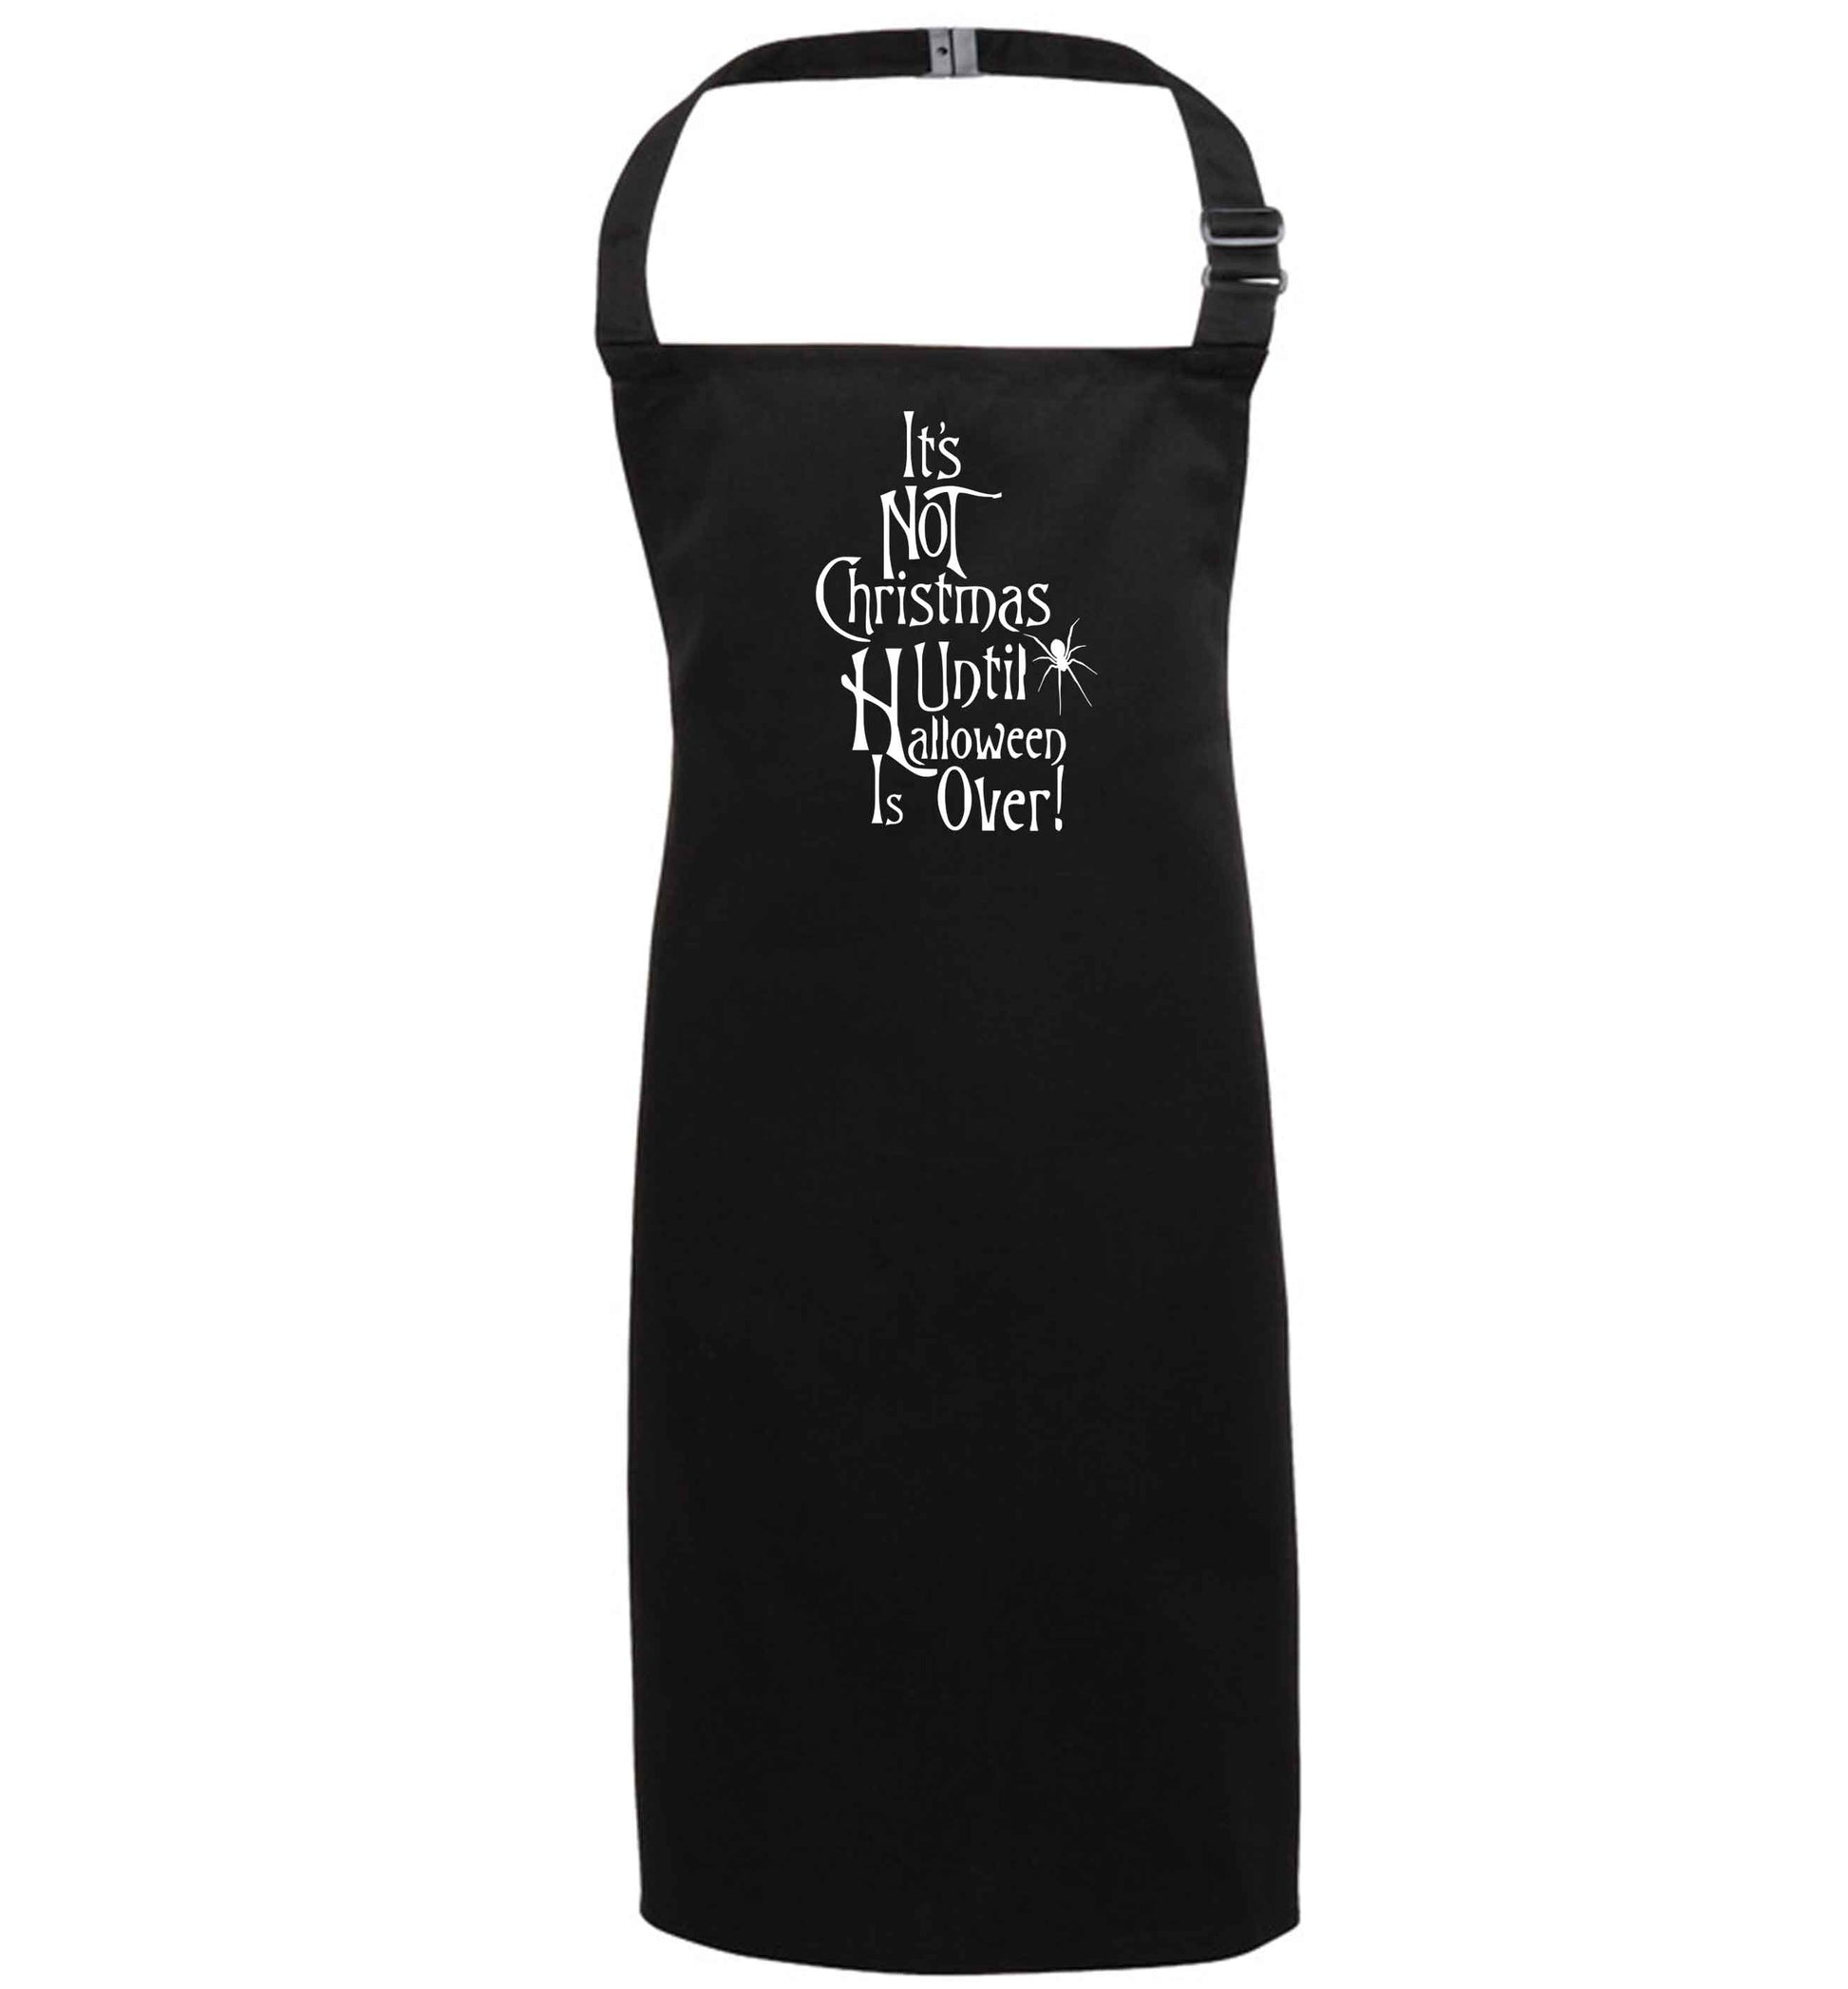 It's not Christmas until Halloween is over black apron 7-10 years